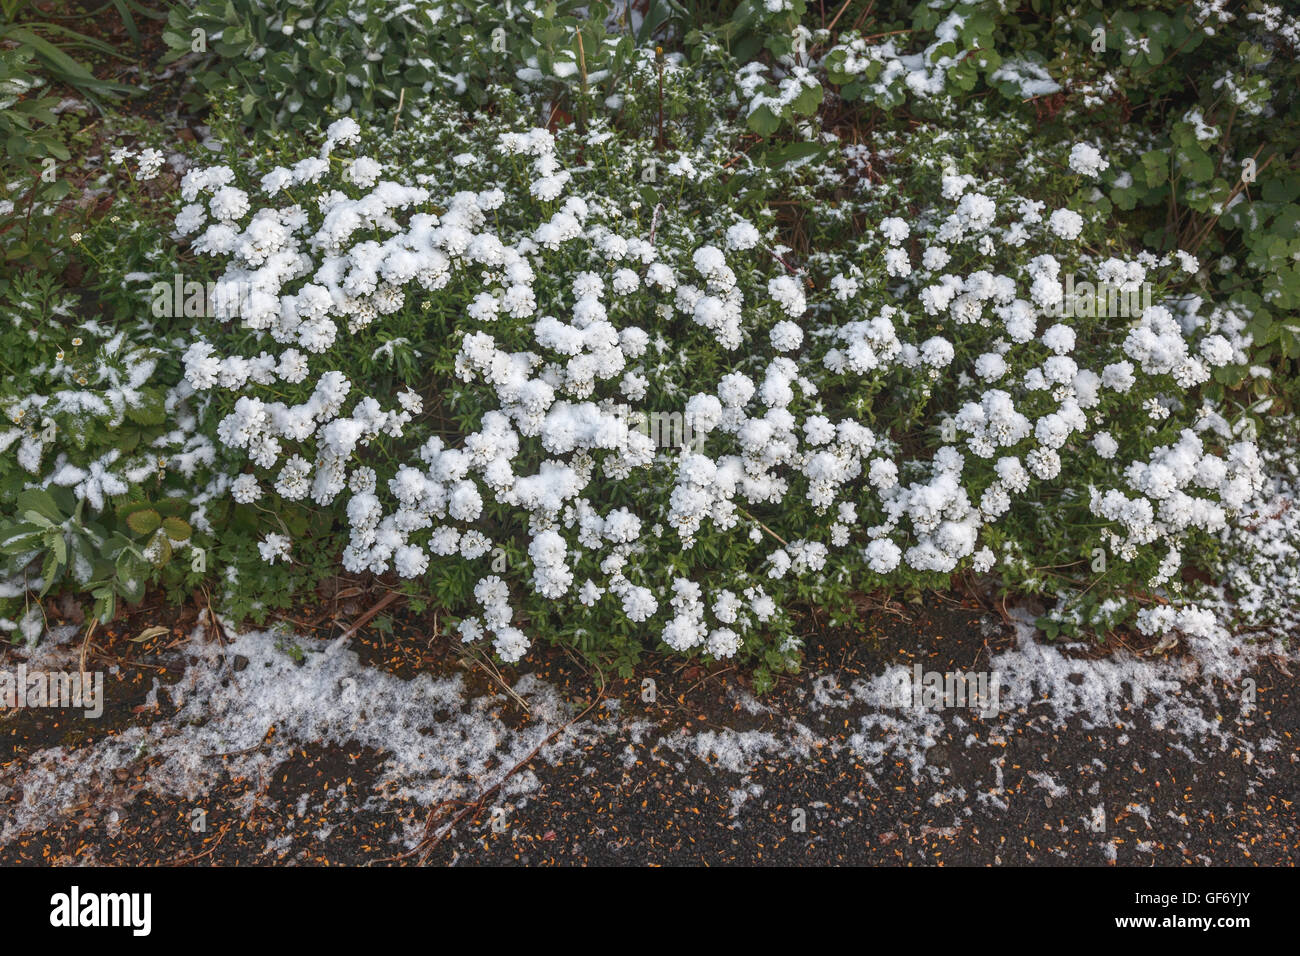 Iberis sempervirens (perennial candytuft) in flower and covered in late April snow, UK Stock Photo